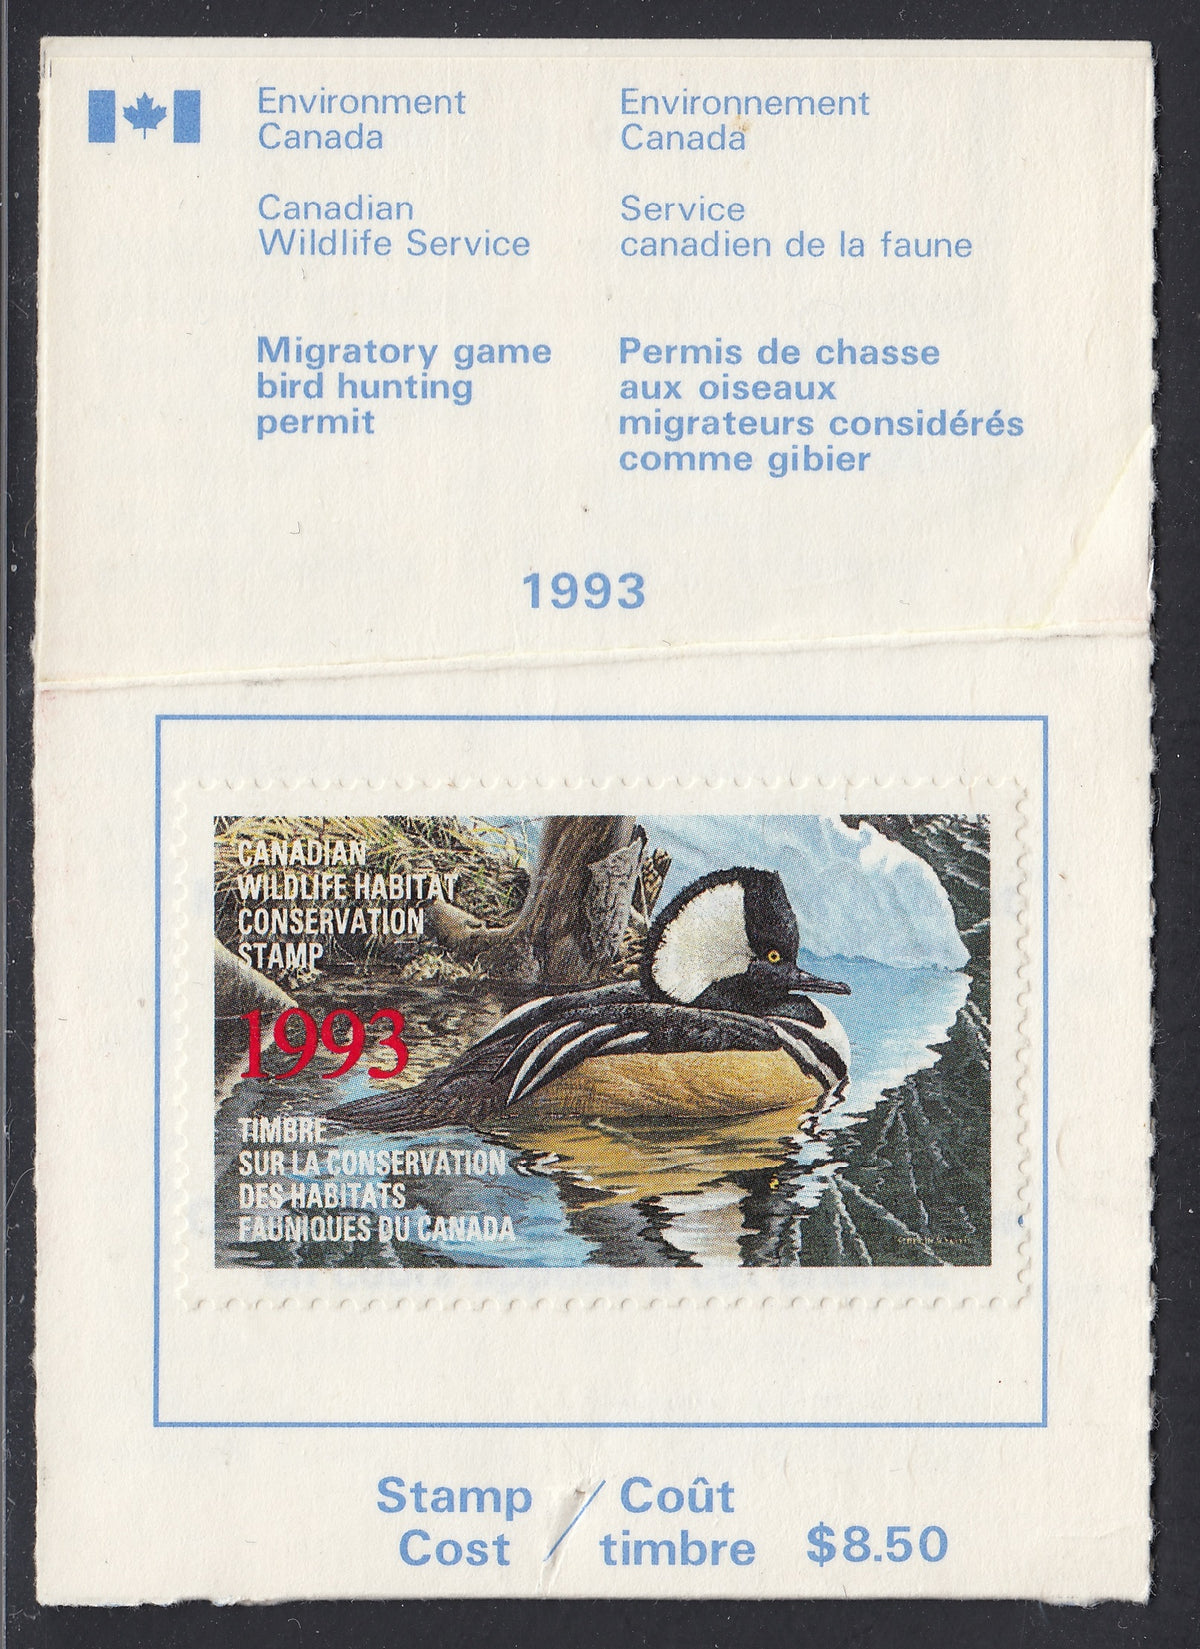 0009FW2105 - FWH9a - Used on License